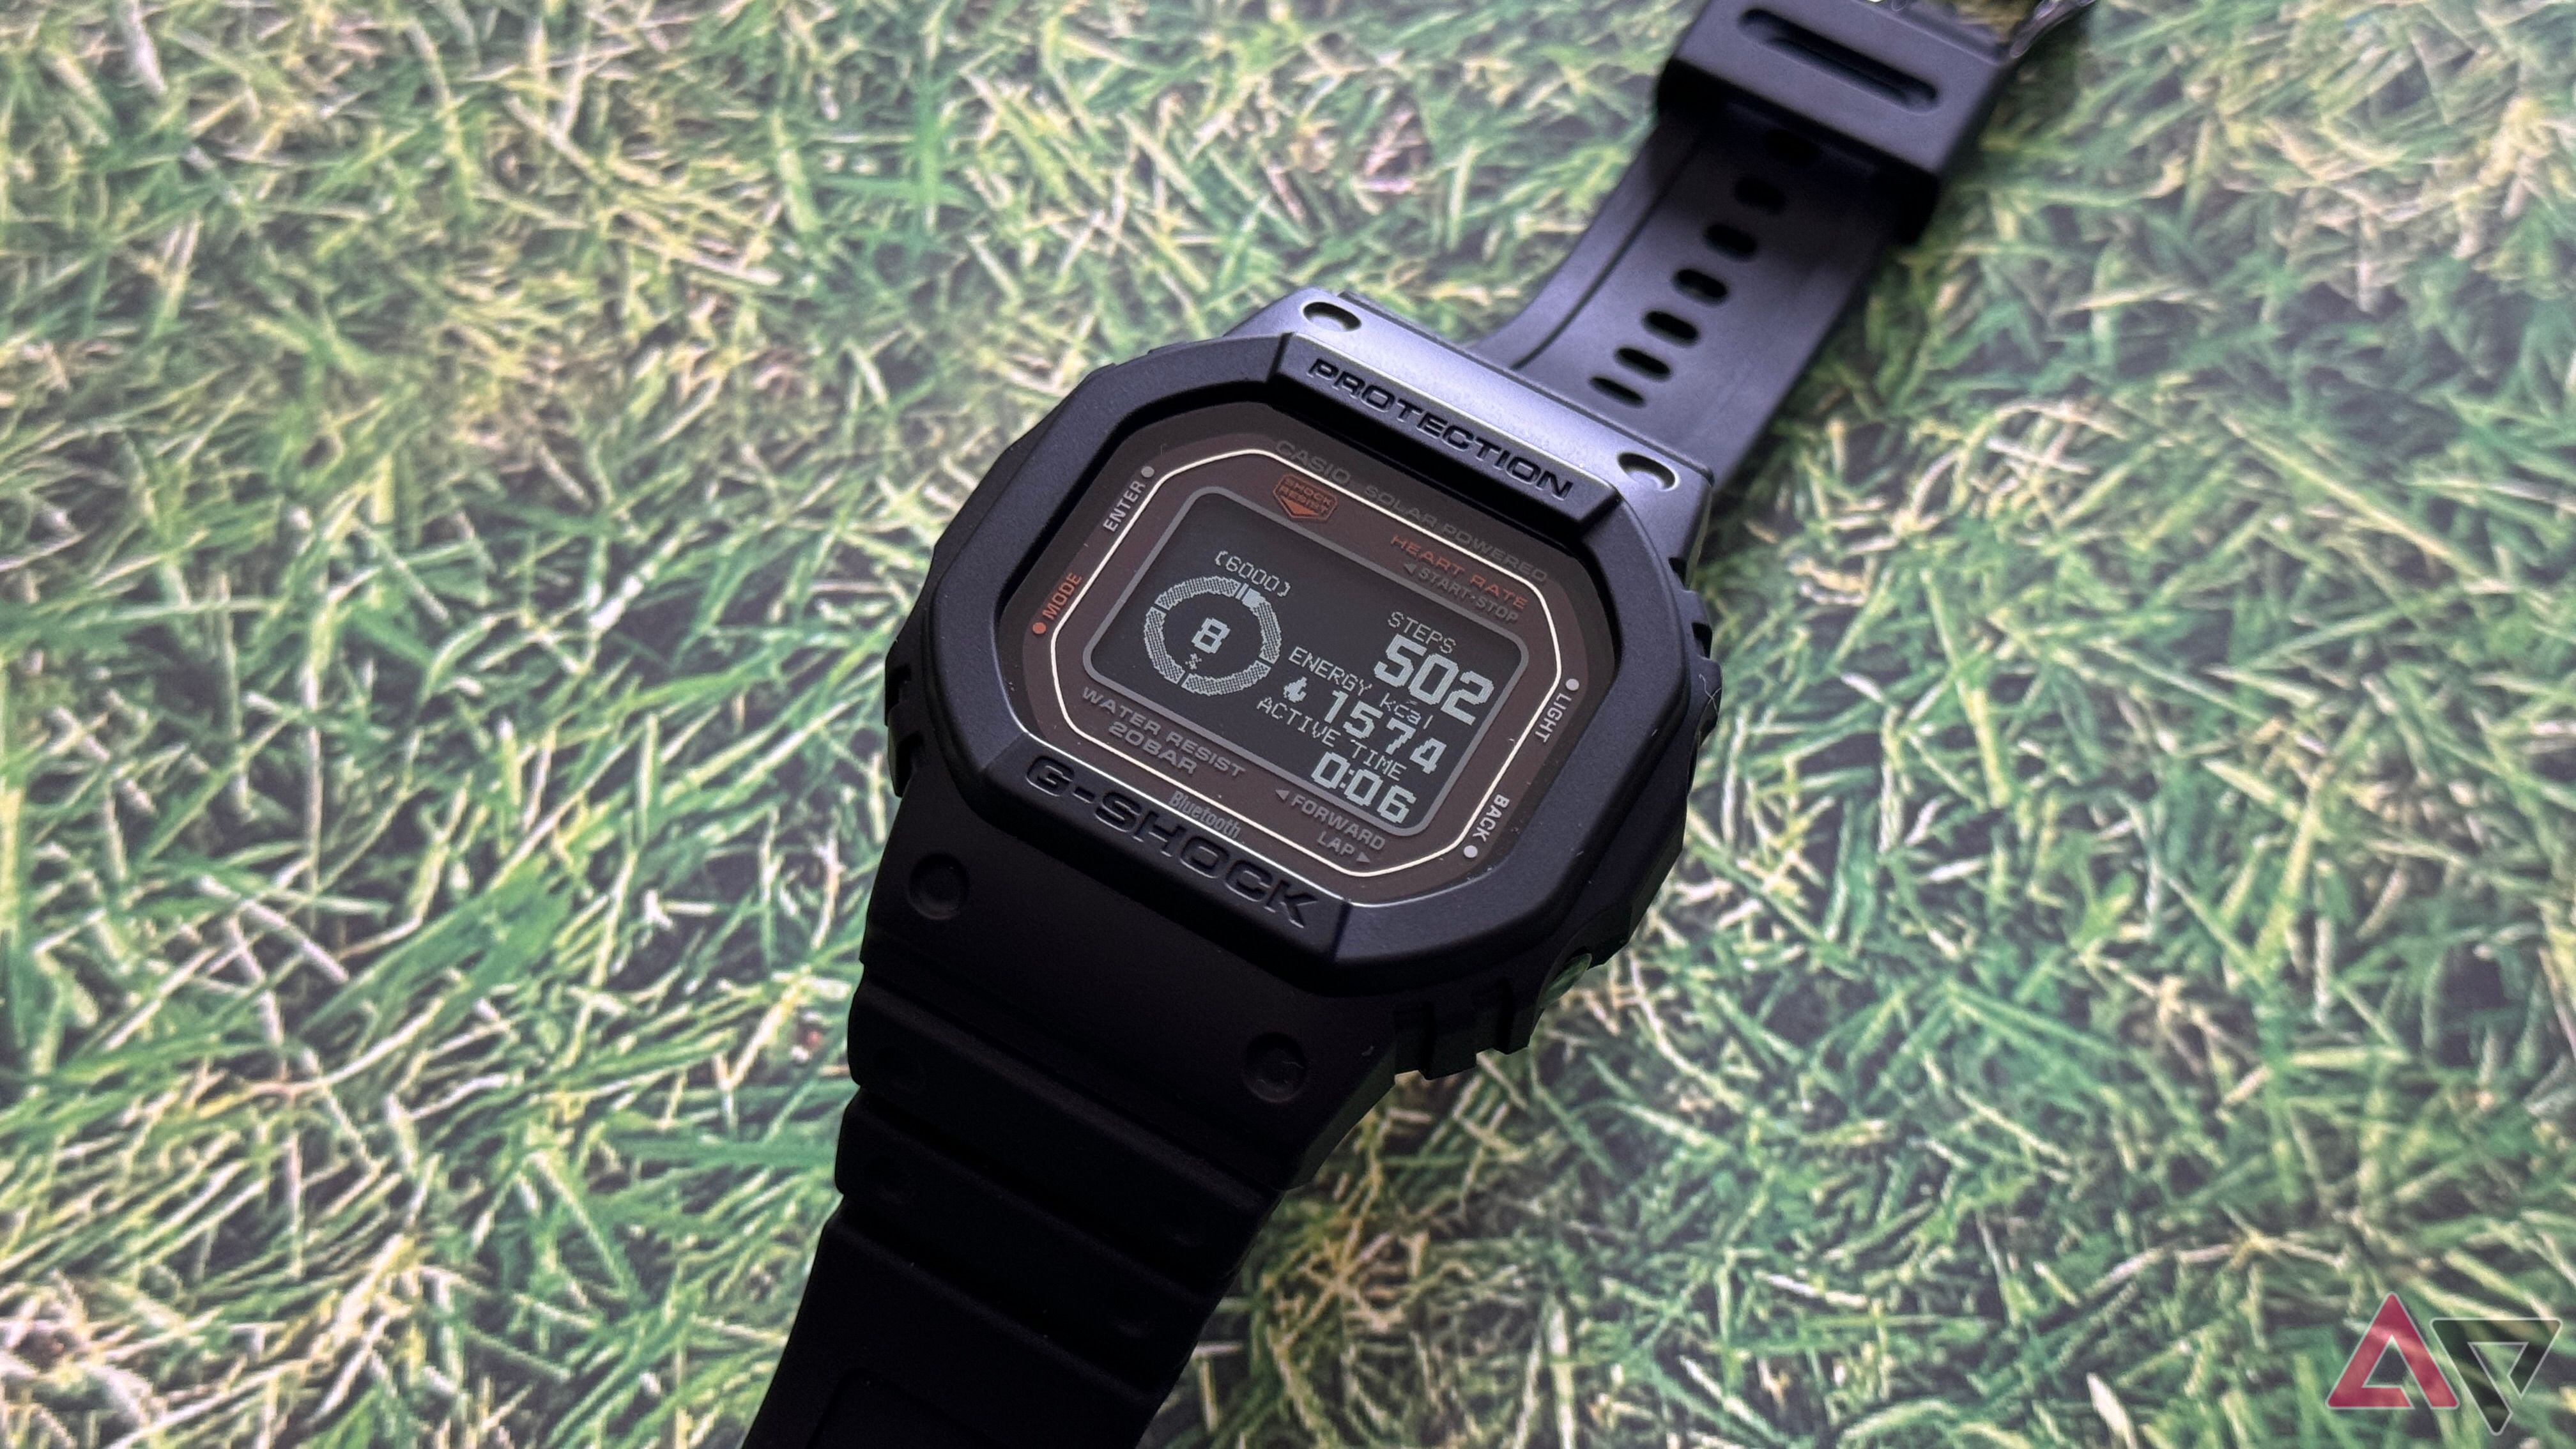 G-Shock Move DWH5600 displaying health tracking information